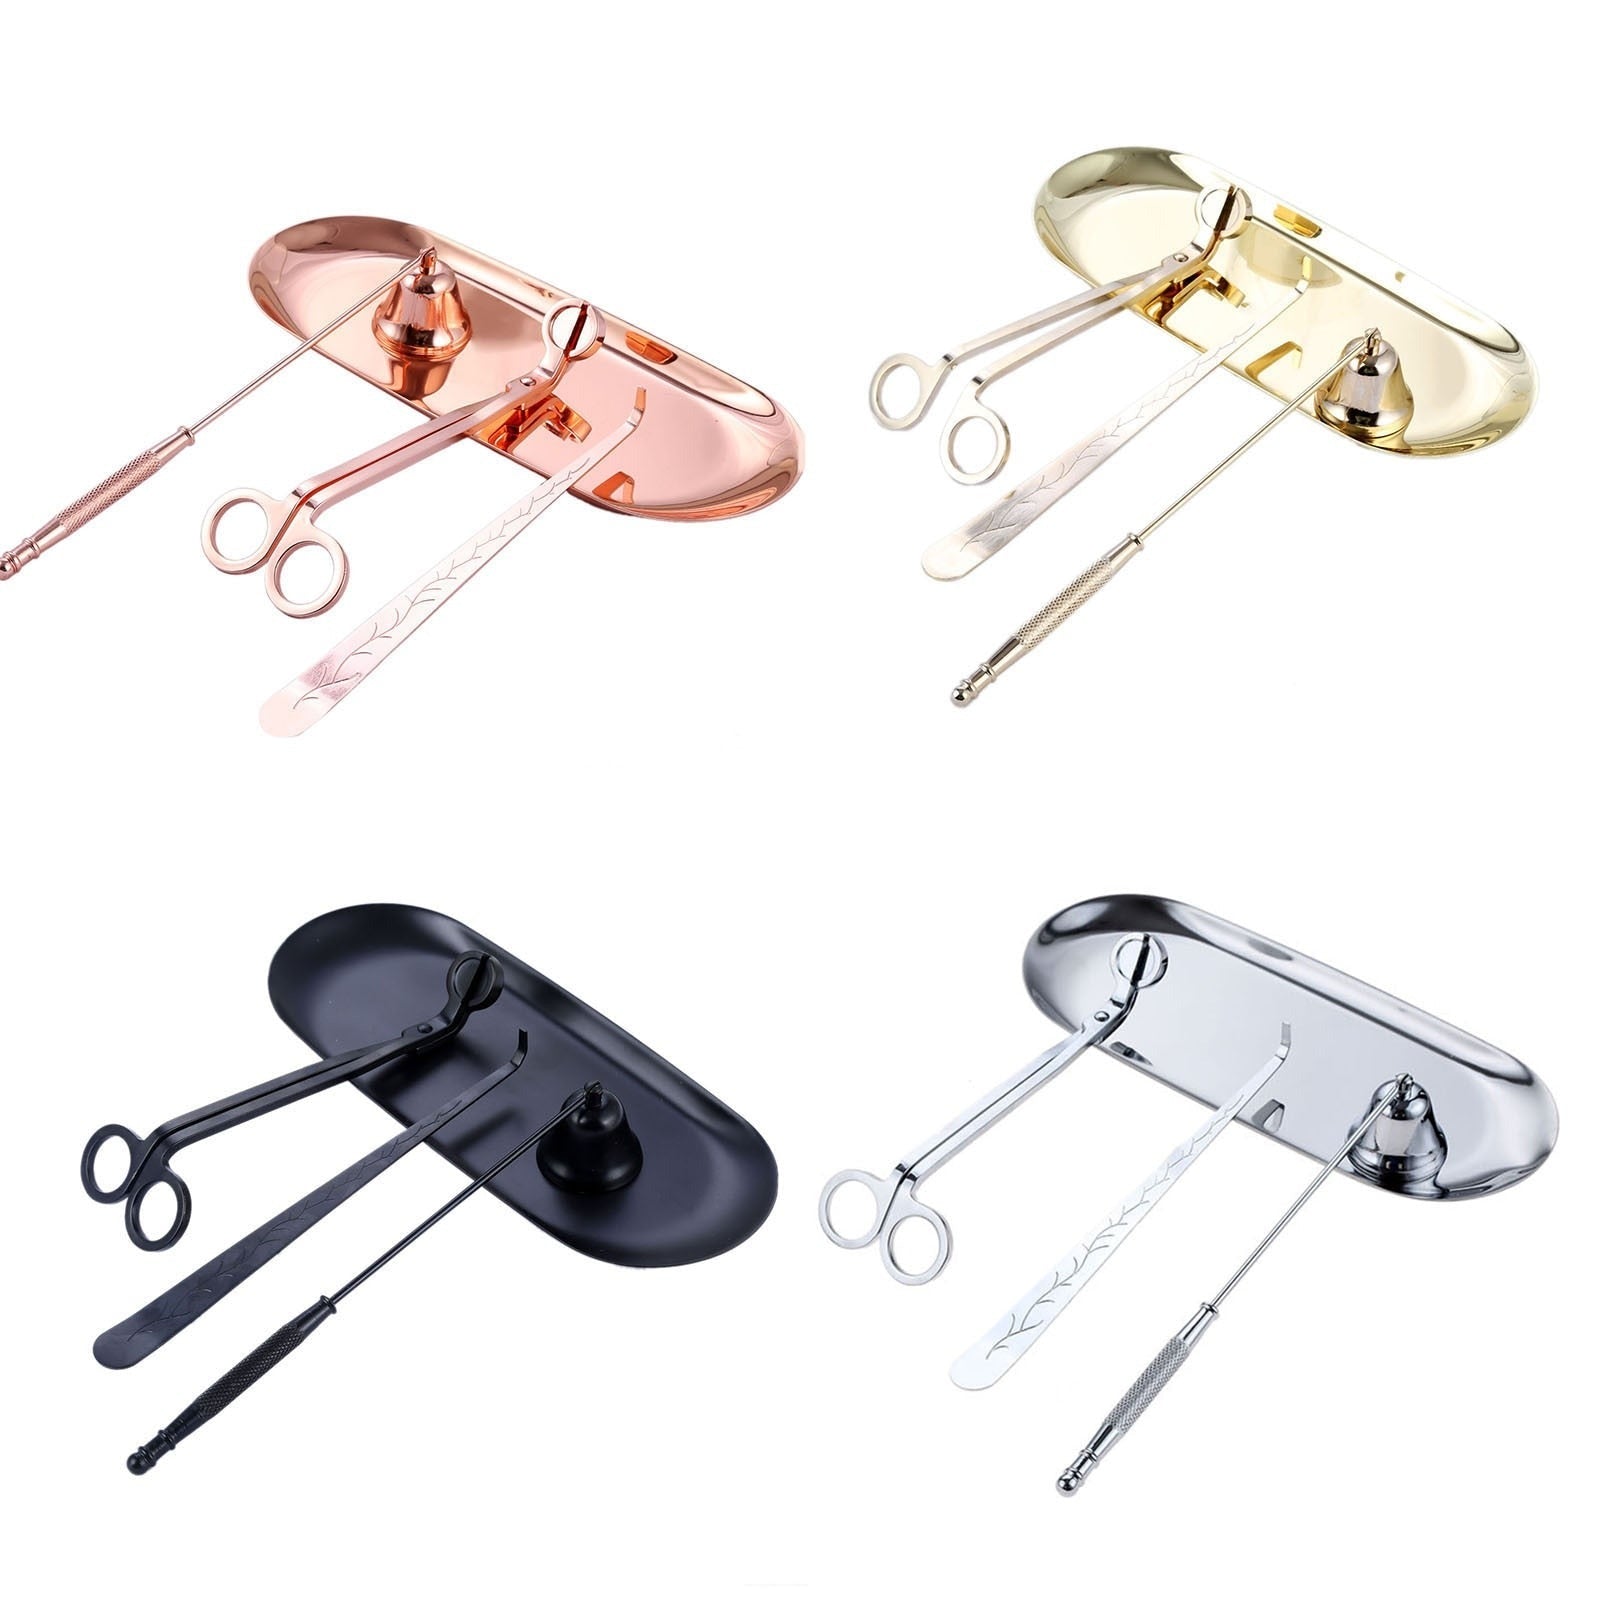 4pcs/set Candle Snuffer Trimmer Hook Tray Dipper Candle scissors Accessory Stainless Steel Extinguisher Flame Home Decoration